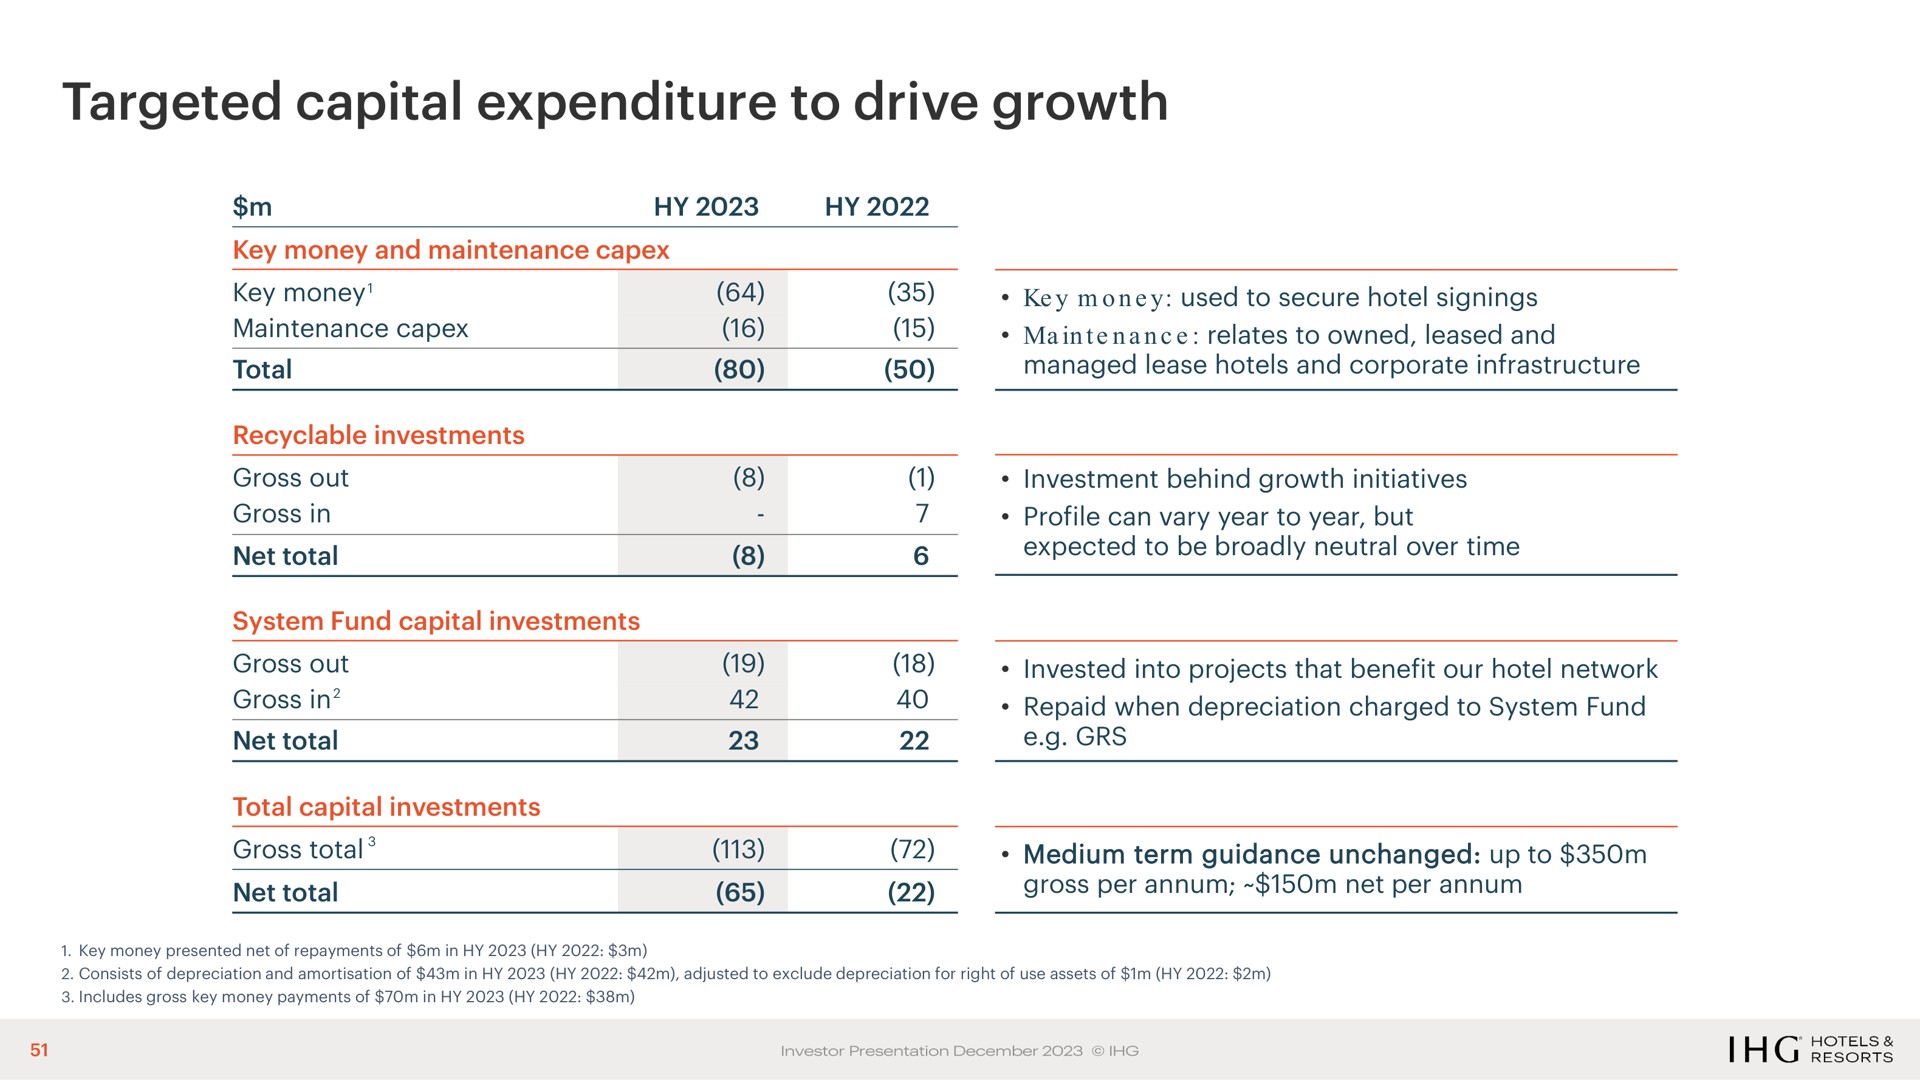 targeted capital expenditure to drive growth | IHG Hotels